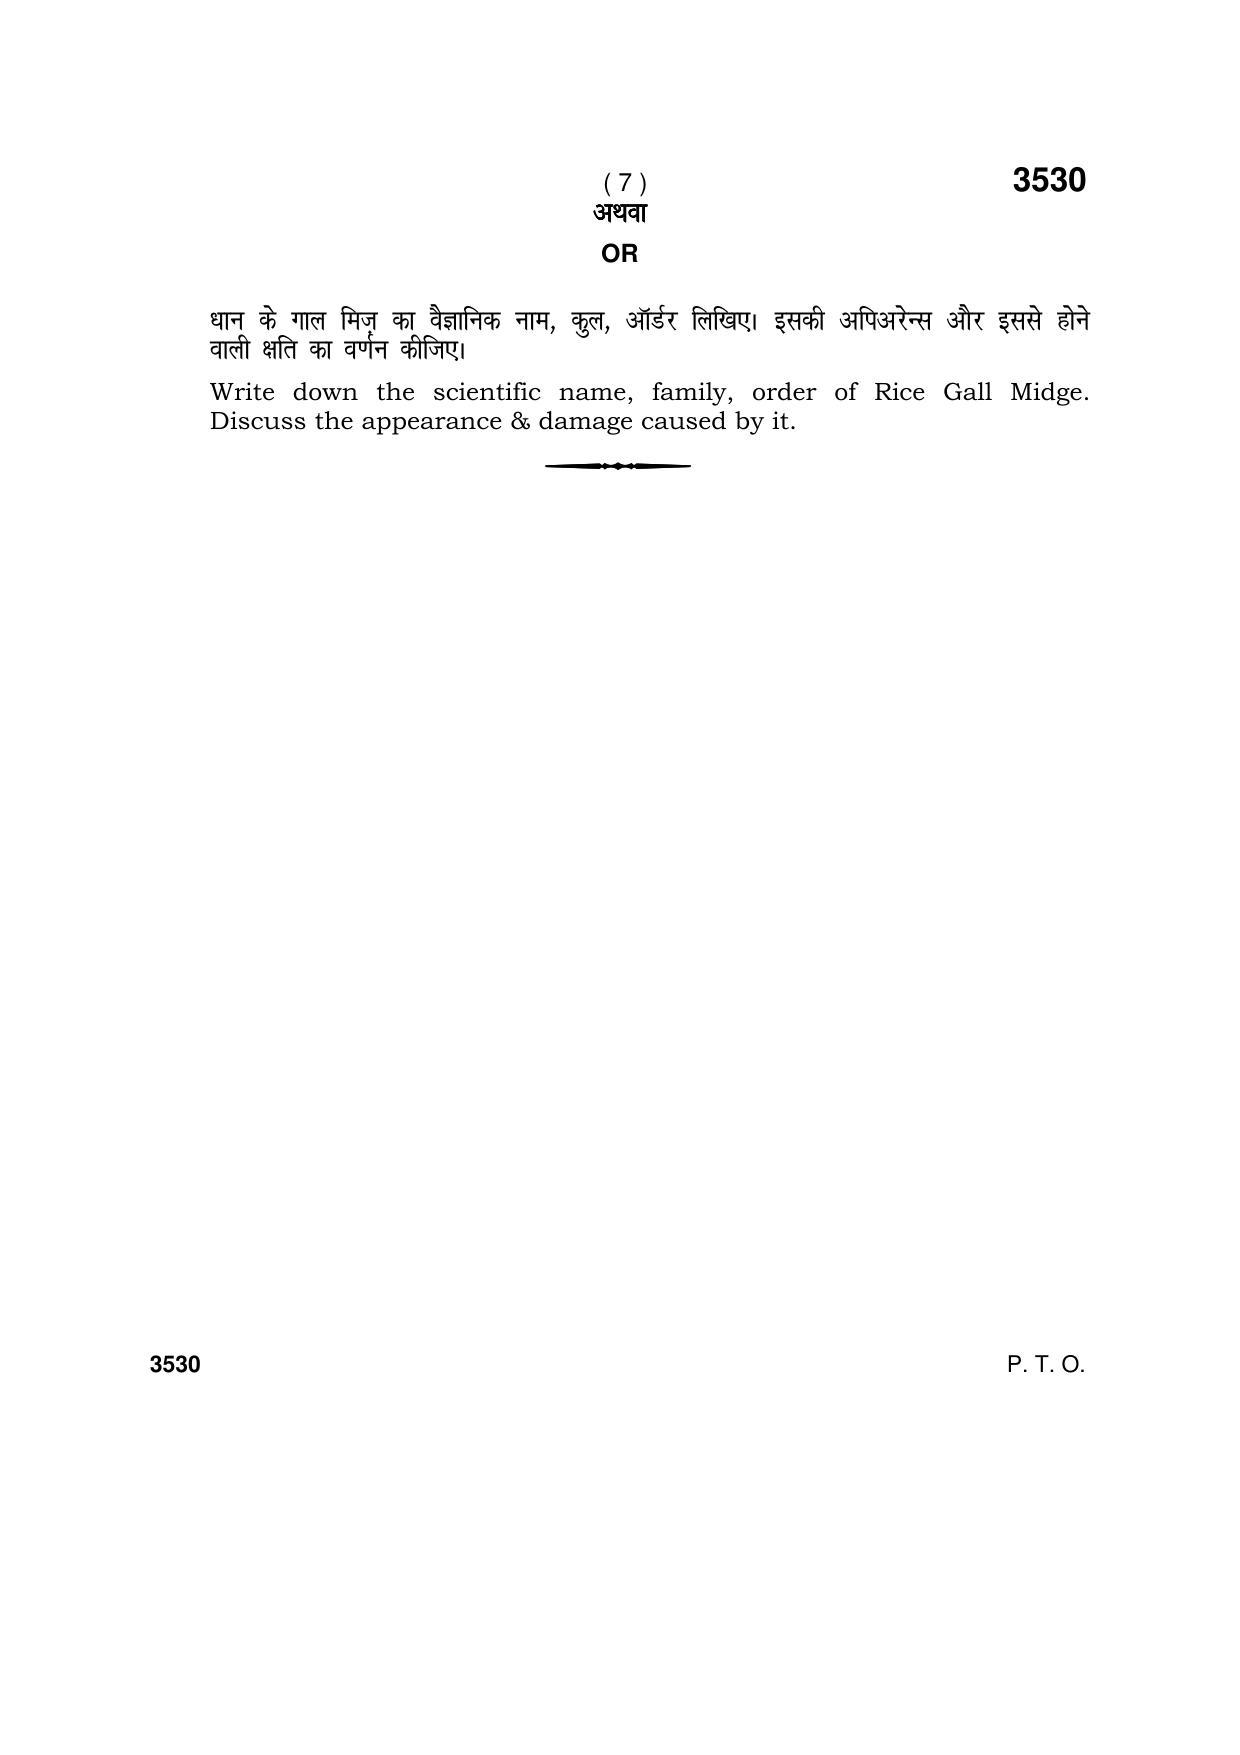 Haryana Board HBSE Class 10 Agriculture Paddy Farming 2018 Question Paper - Page 7